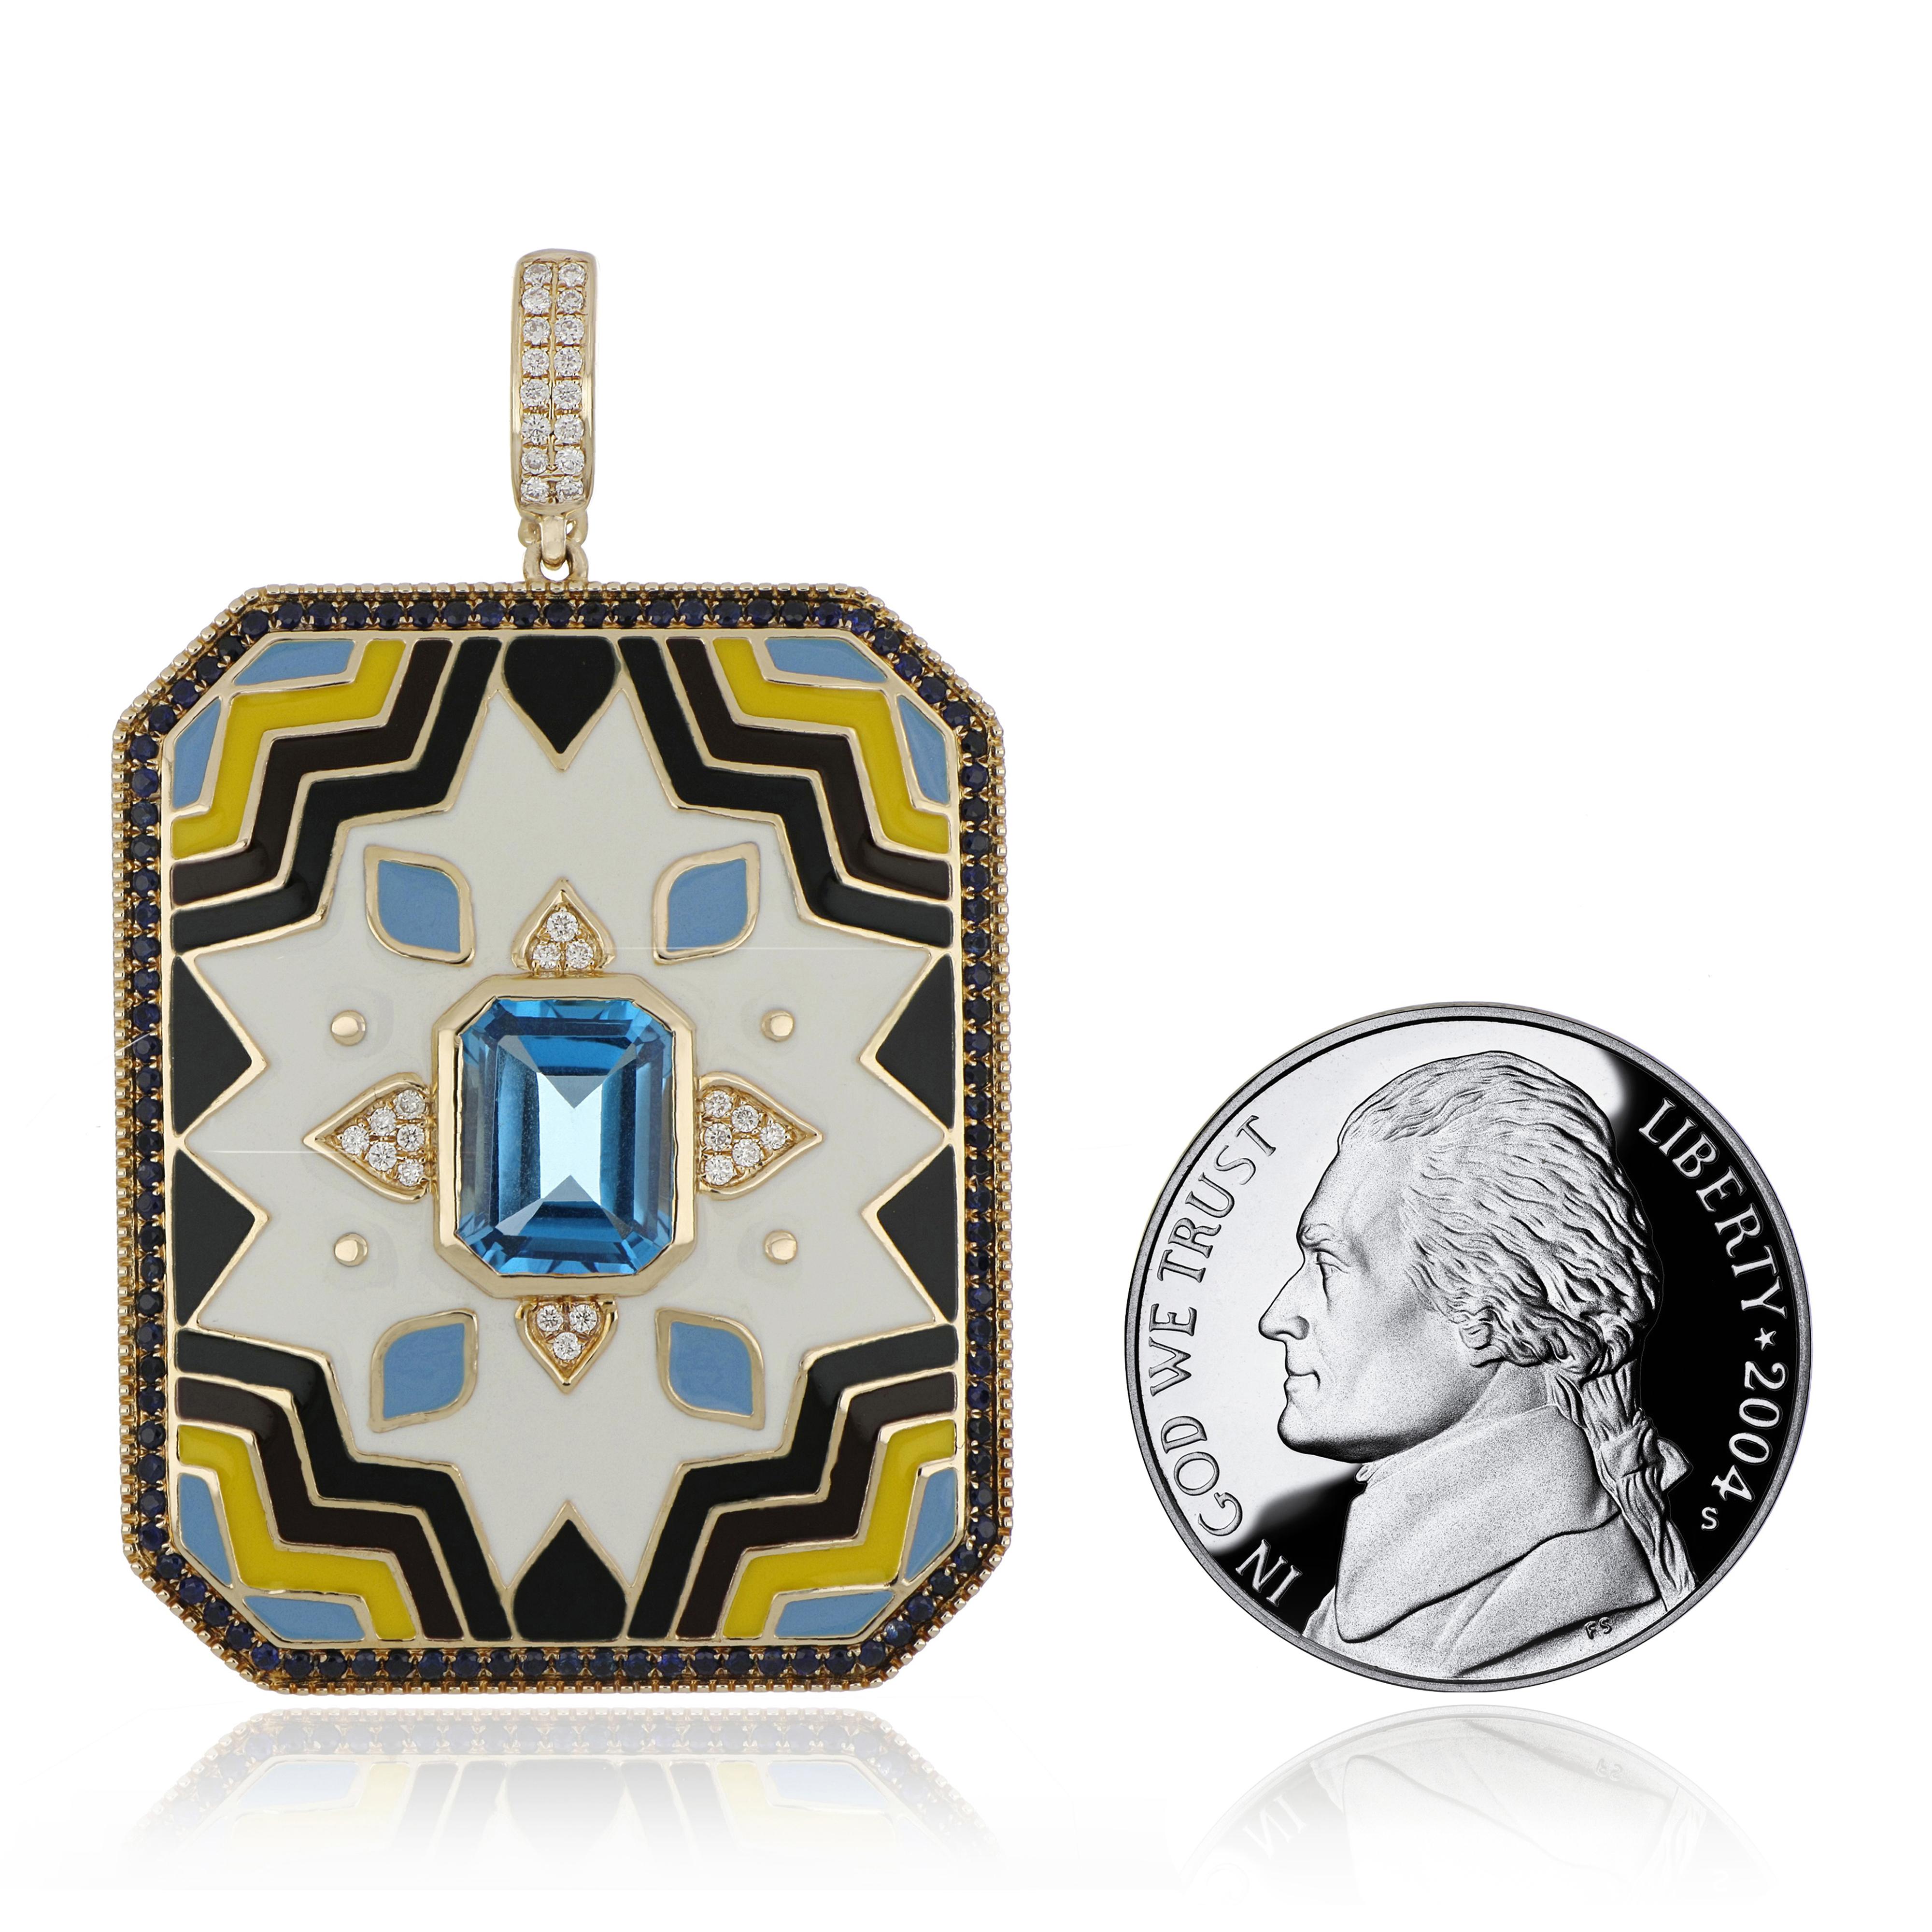 Elegant and exquisite Enamel Cocktail 14 K Pendant, center set with 2.55 Cts. Octagon Cut Swiss Blue Topaz, accented with Diamonds, weighing approx. 0.1 Cts and Surrounded with 0.46 Cts of Blue Sapphire Beautifully Hand crafted in 14 Karat Yellow